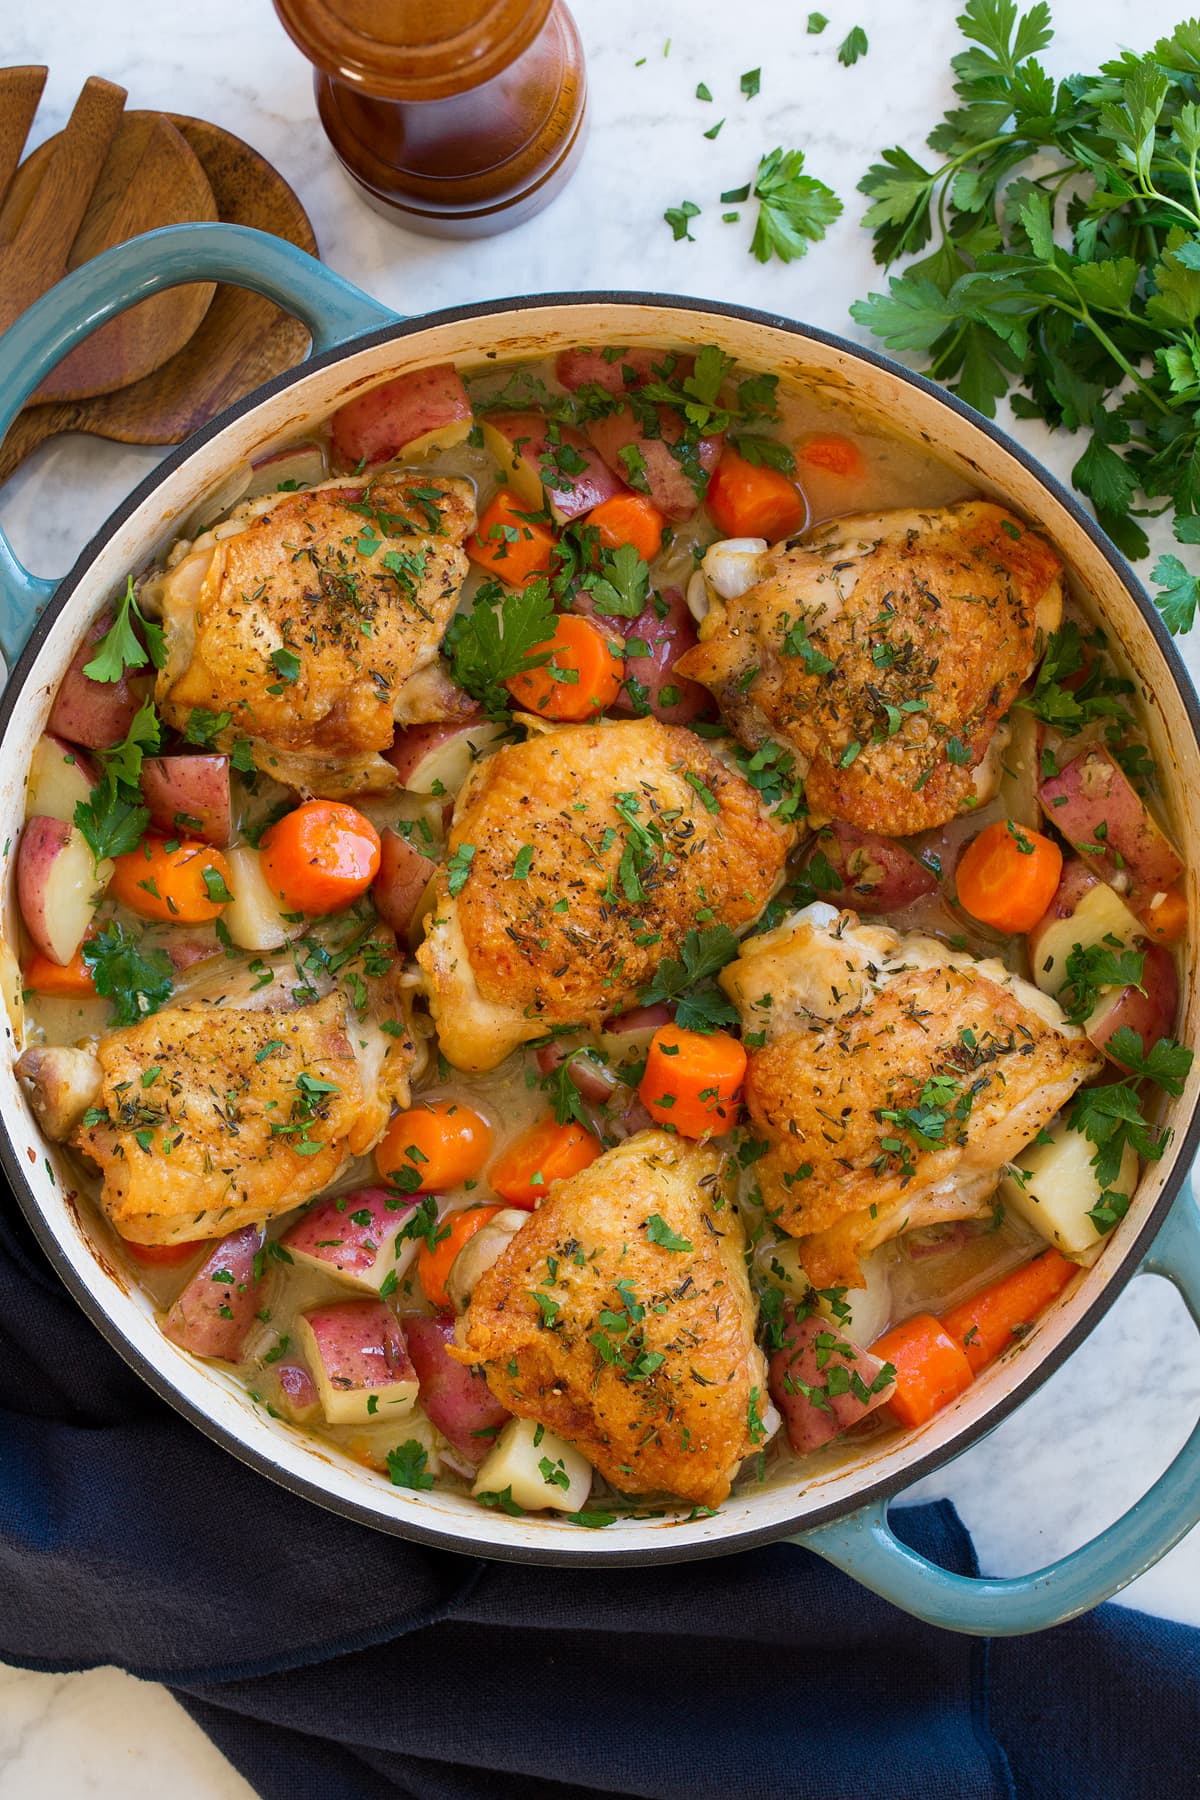 Braised chicken thighs with bones and skin in a braiser pot with carrots and potatoes.